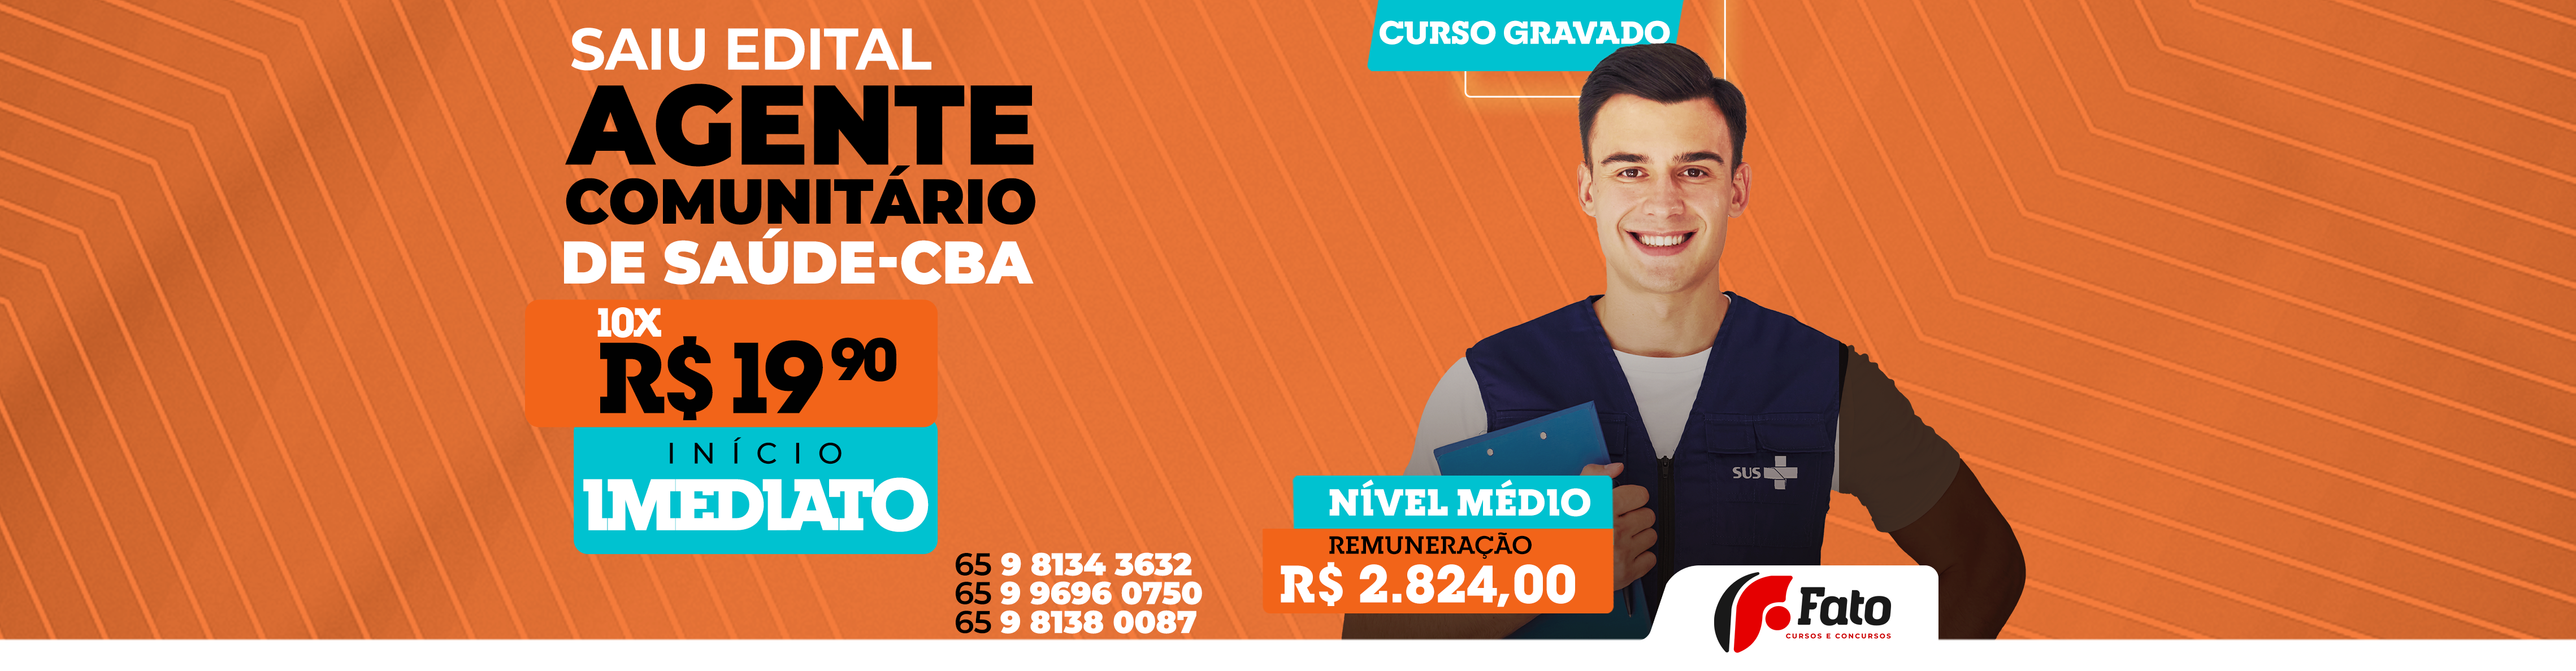 POST CURSO SMS - BANNER SITE